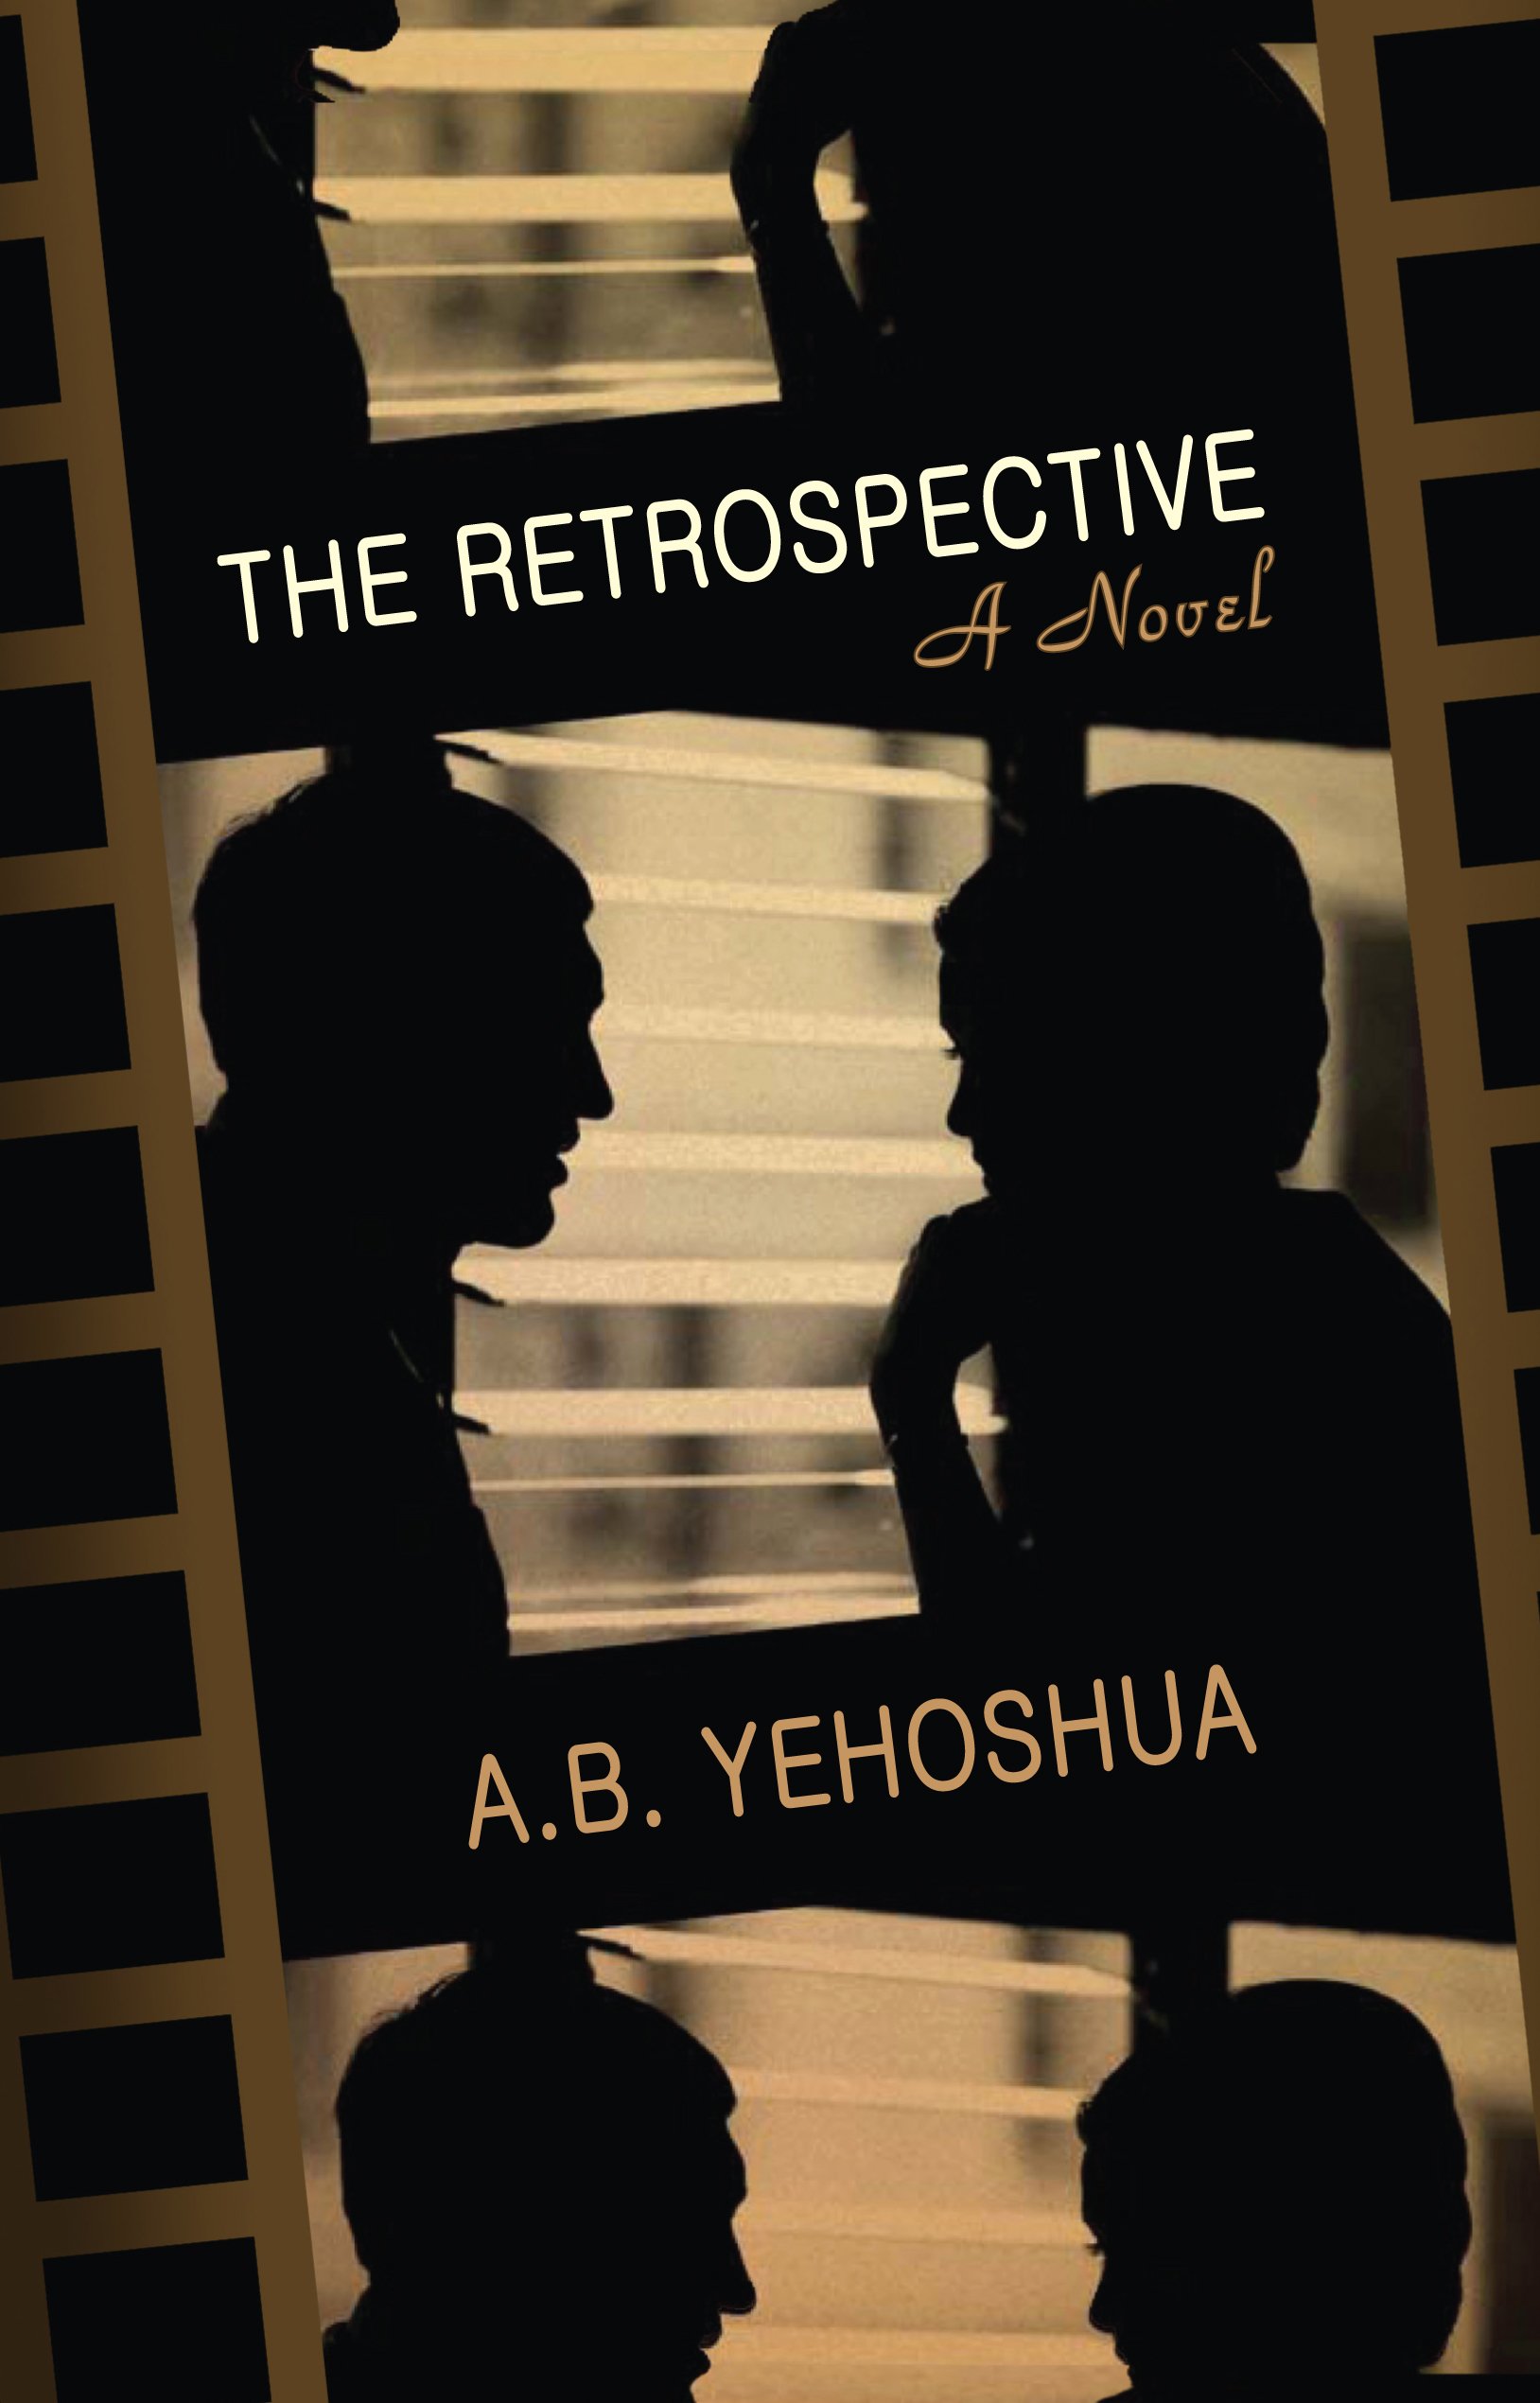 The Retrospective 9781905559572 front cover high res.jpg